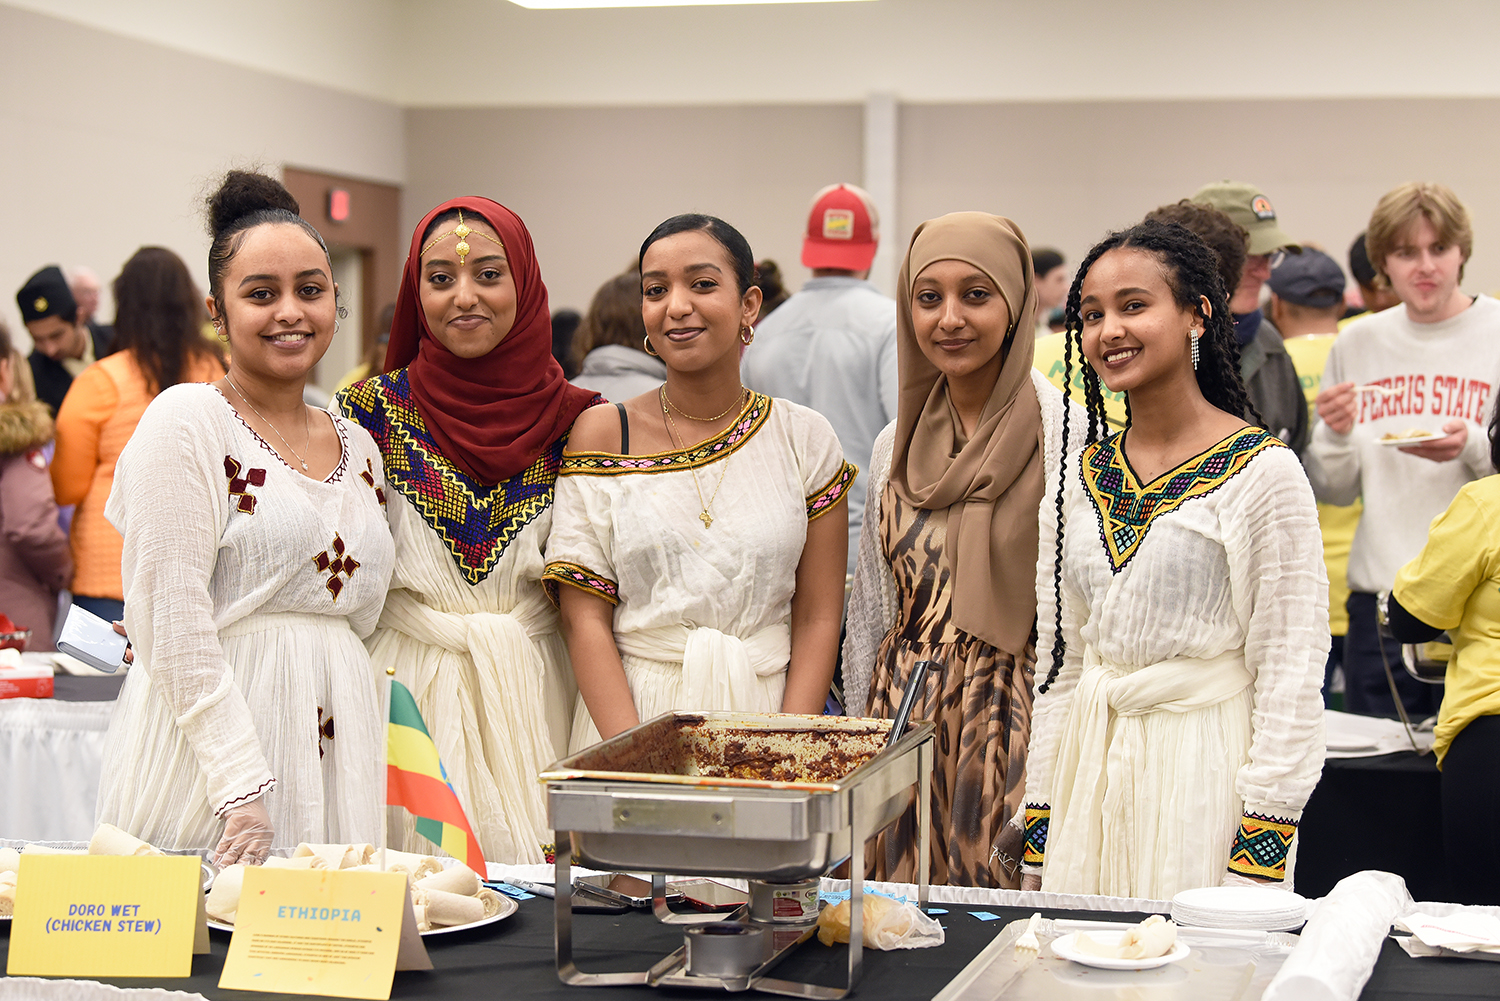 Culture And Cuisine Abound Through Collaborative Effort at Ferris State’s International Festival of Cultures April 7 